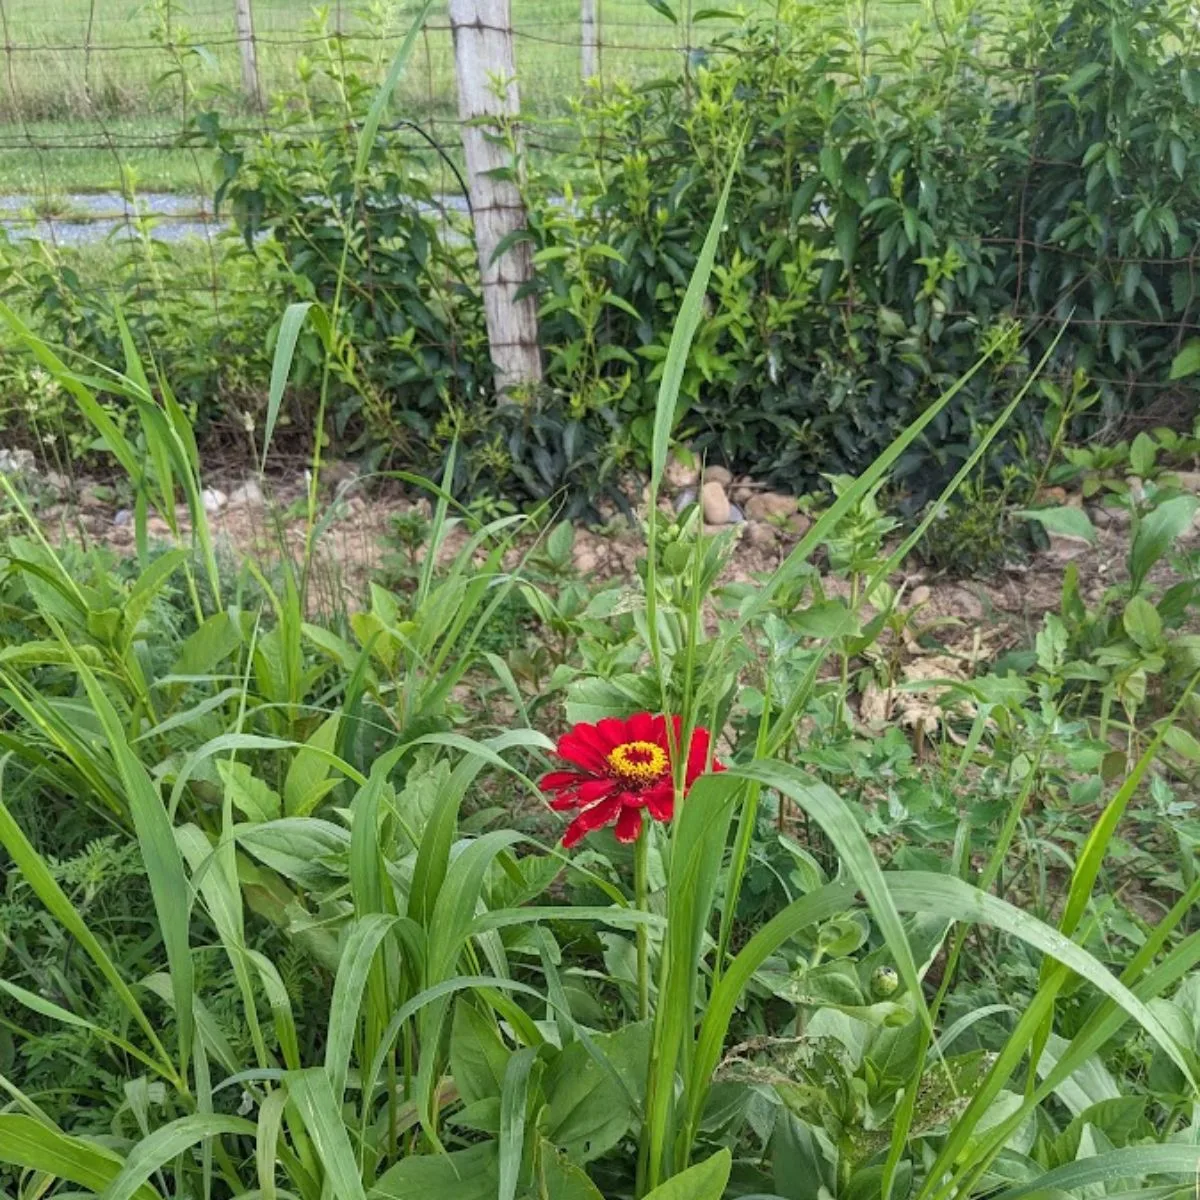 Red zinnia flower surrounded by Johnson grass.